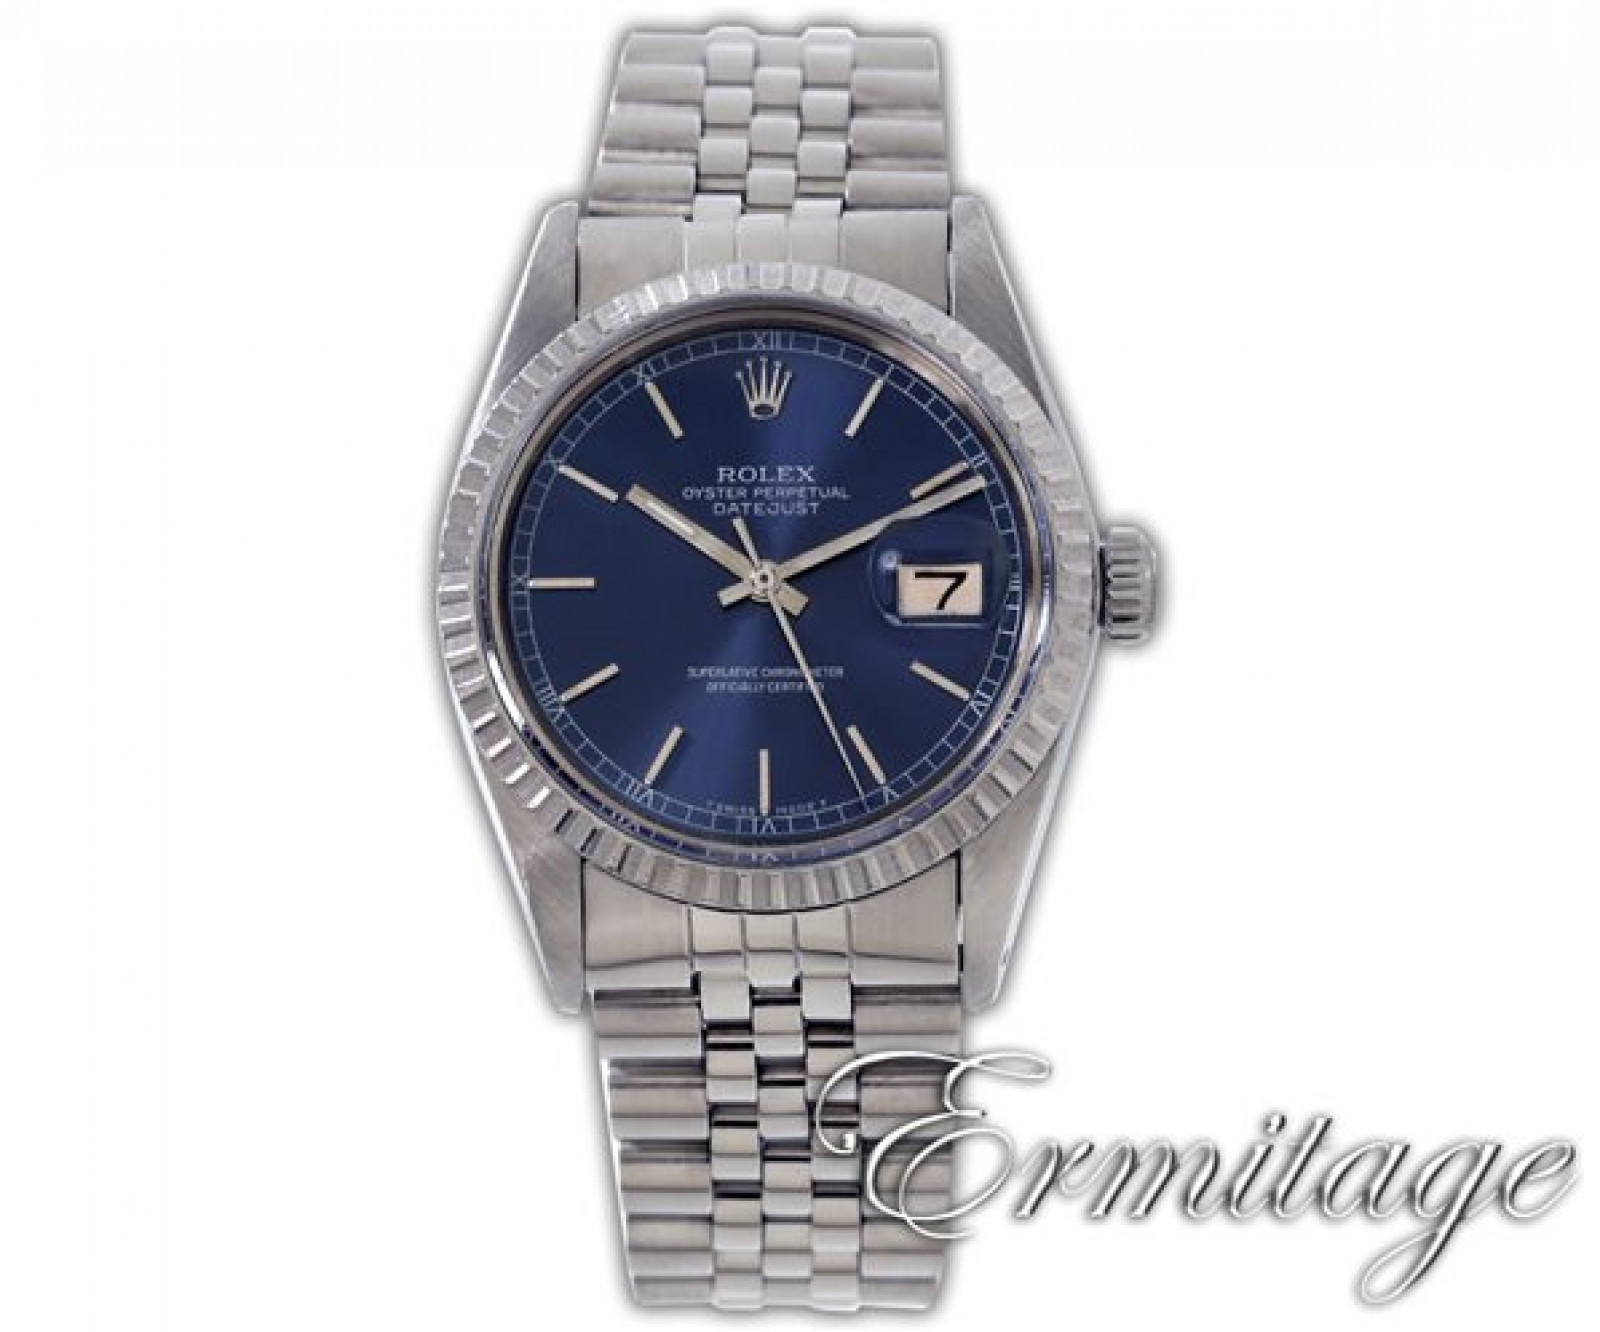 Pre-Owned Rolex Datejust 16030 Year 1980